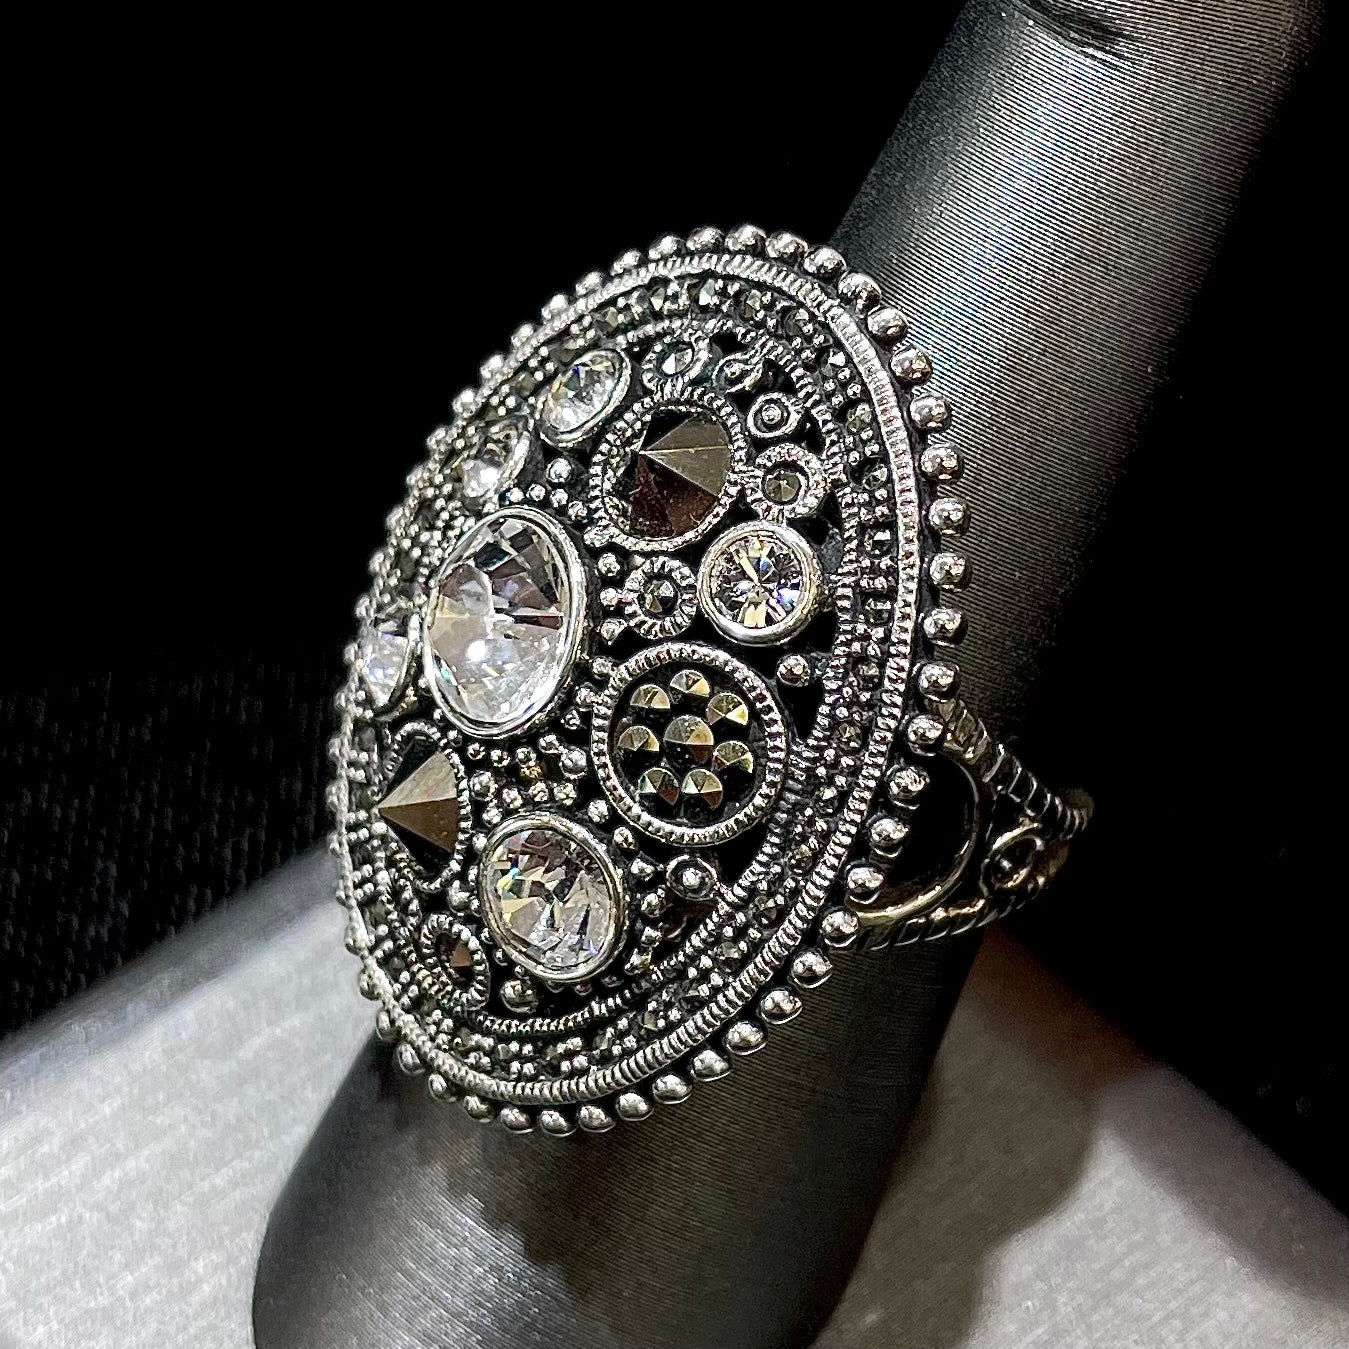 Silver Steam Punk style gear ring set with marcasite and round faceted glass stones.